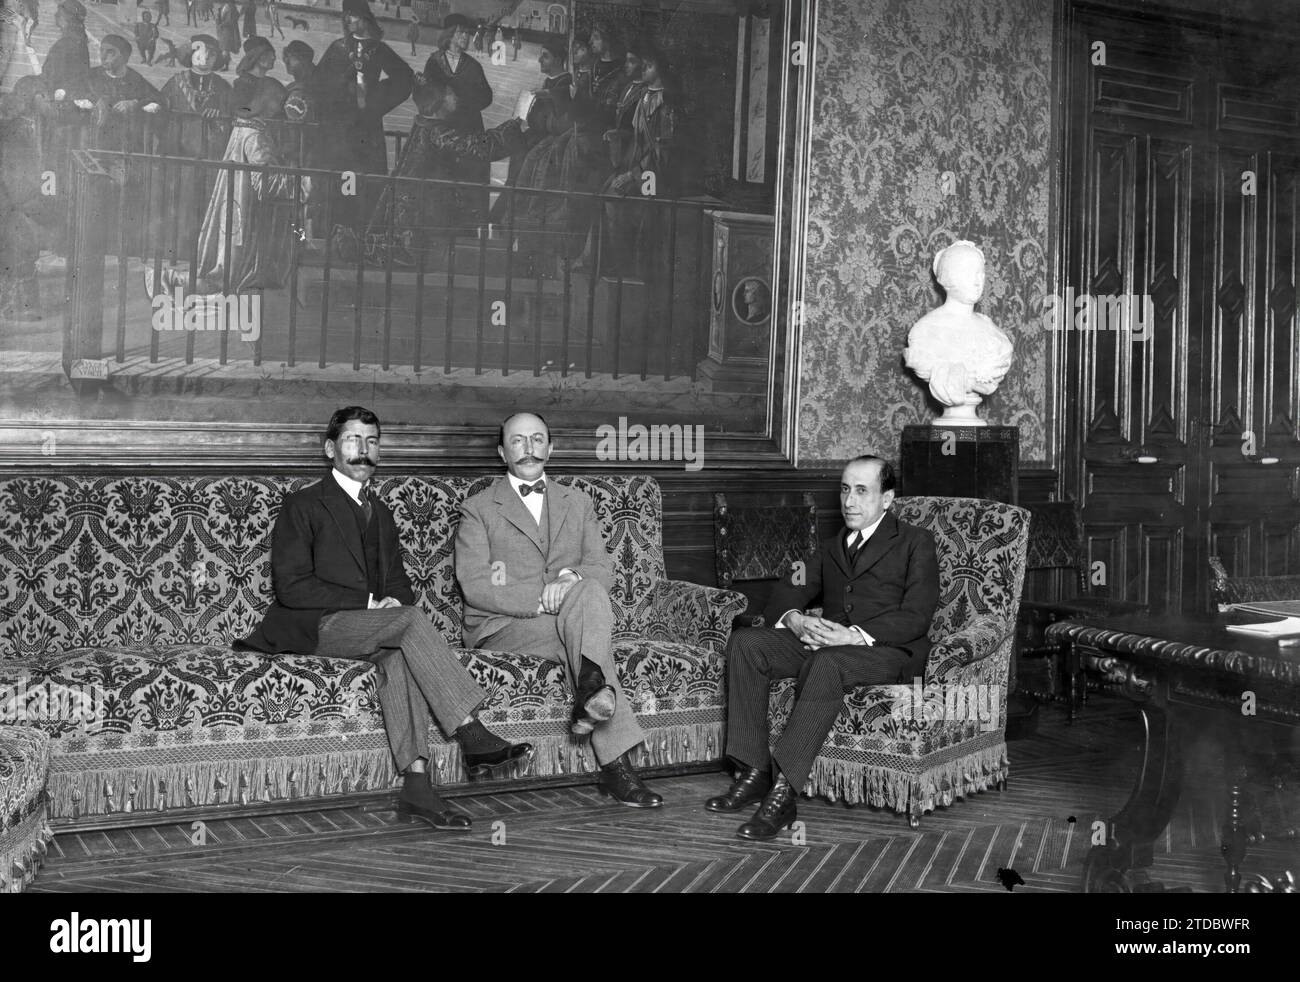 07/10/1917. In the Ministry of State - from Left to Right: the new Minister of Mexico Mr. Eliseo Arredondo, with Minister Marques de Lema, to whom he made his first visit yesterday, accompanied by his Chargé d'Affaires Mr. Amado Nervo. Credit: Album / Archivo ABC / Julio Duque Stock Photo